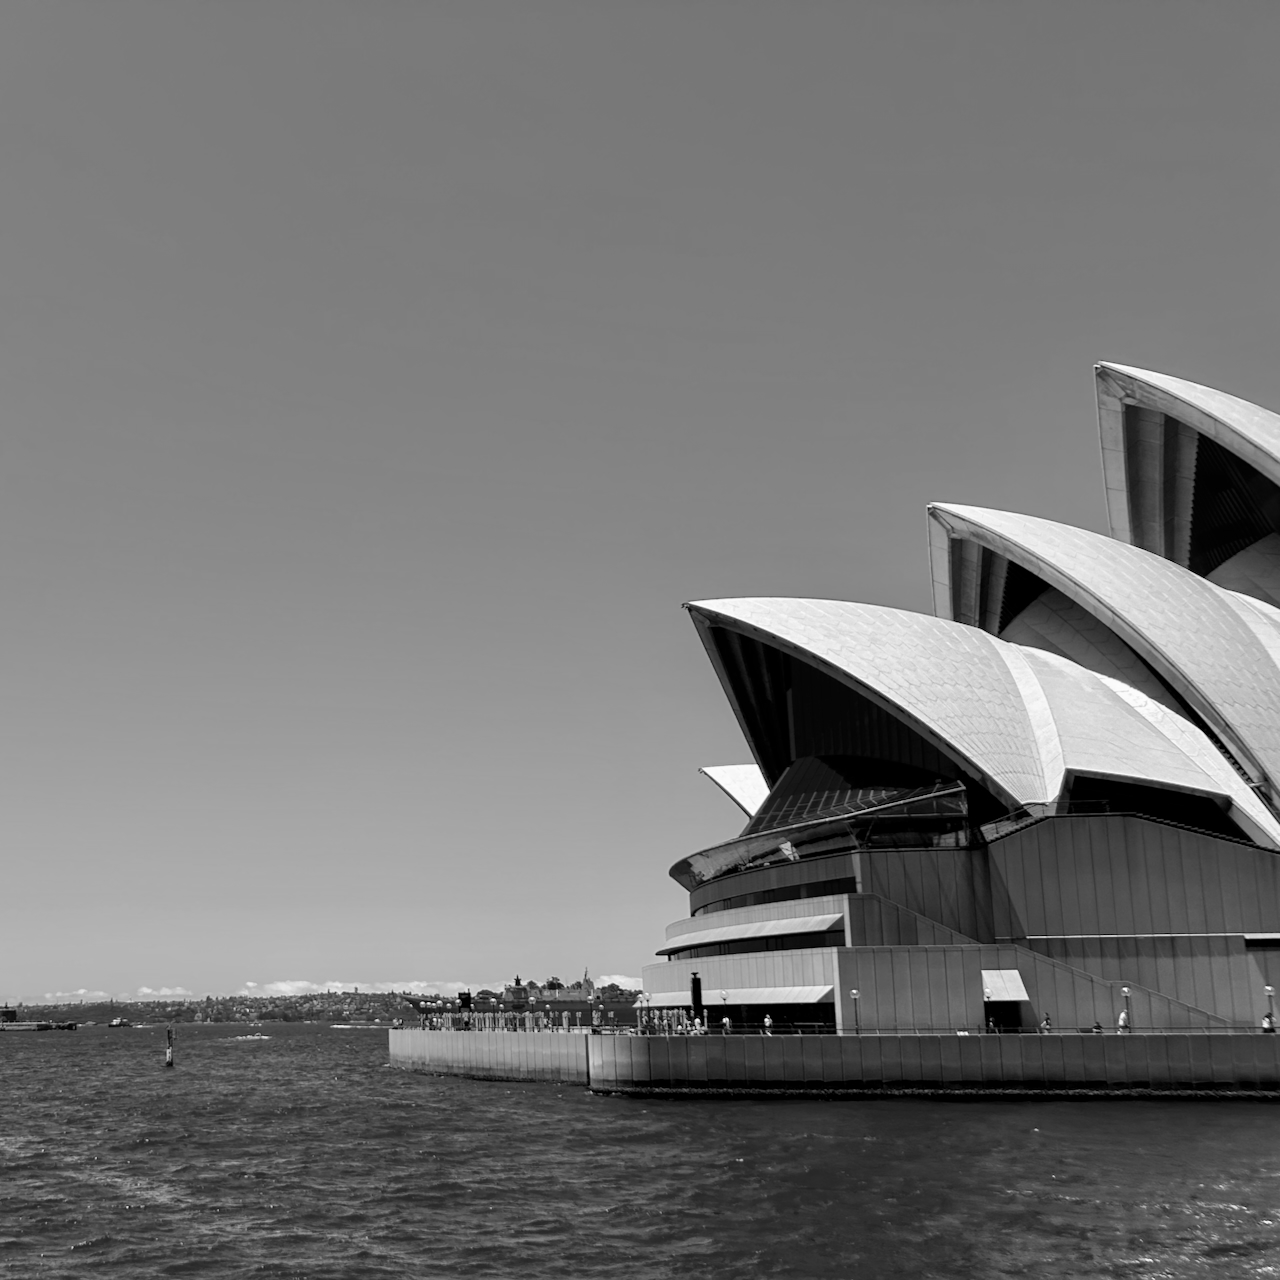 A picture of the Sydney Opera House